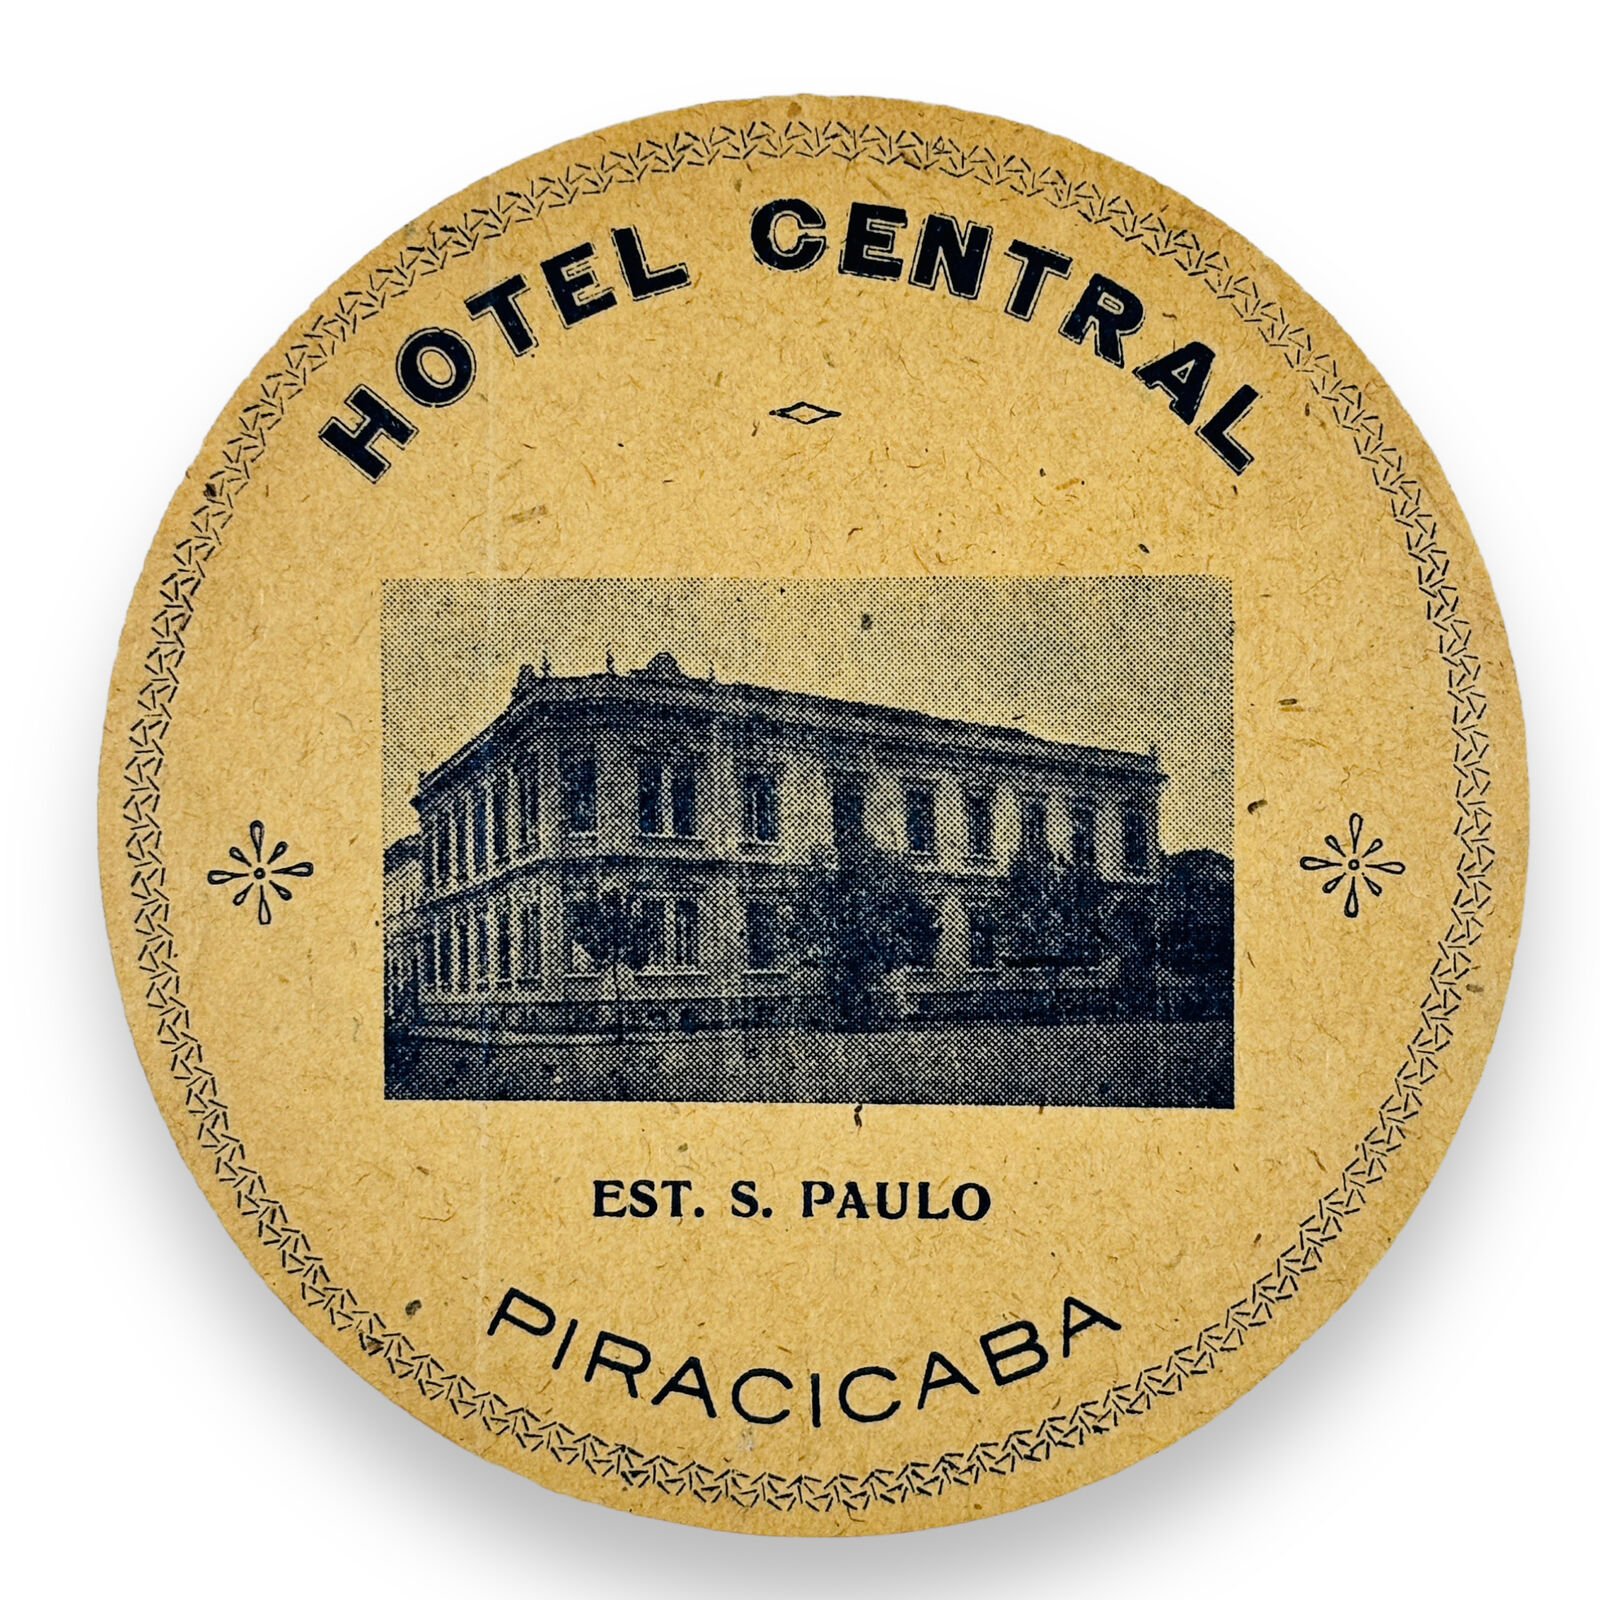 c.1890s Hotel Central Piracicaba Brazil Scarce Vintage Early Luggage Label Decal